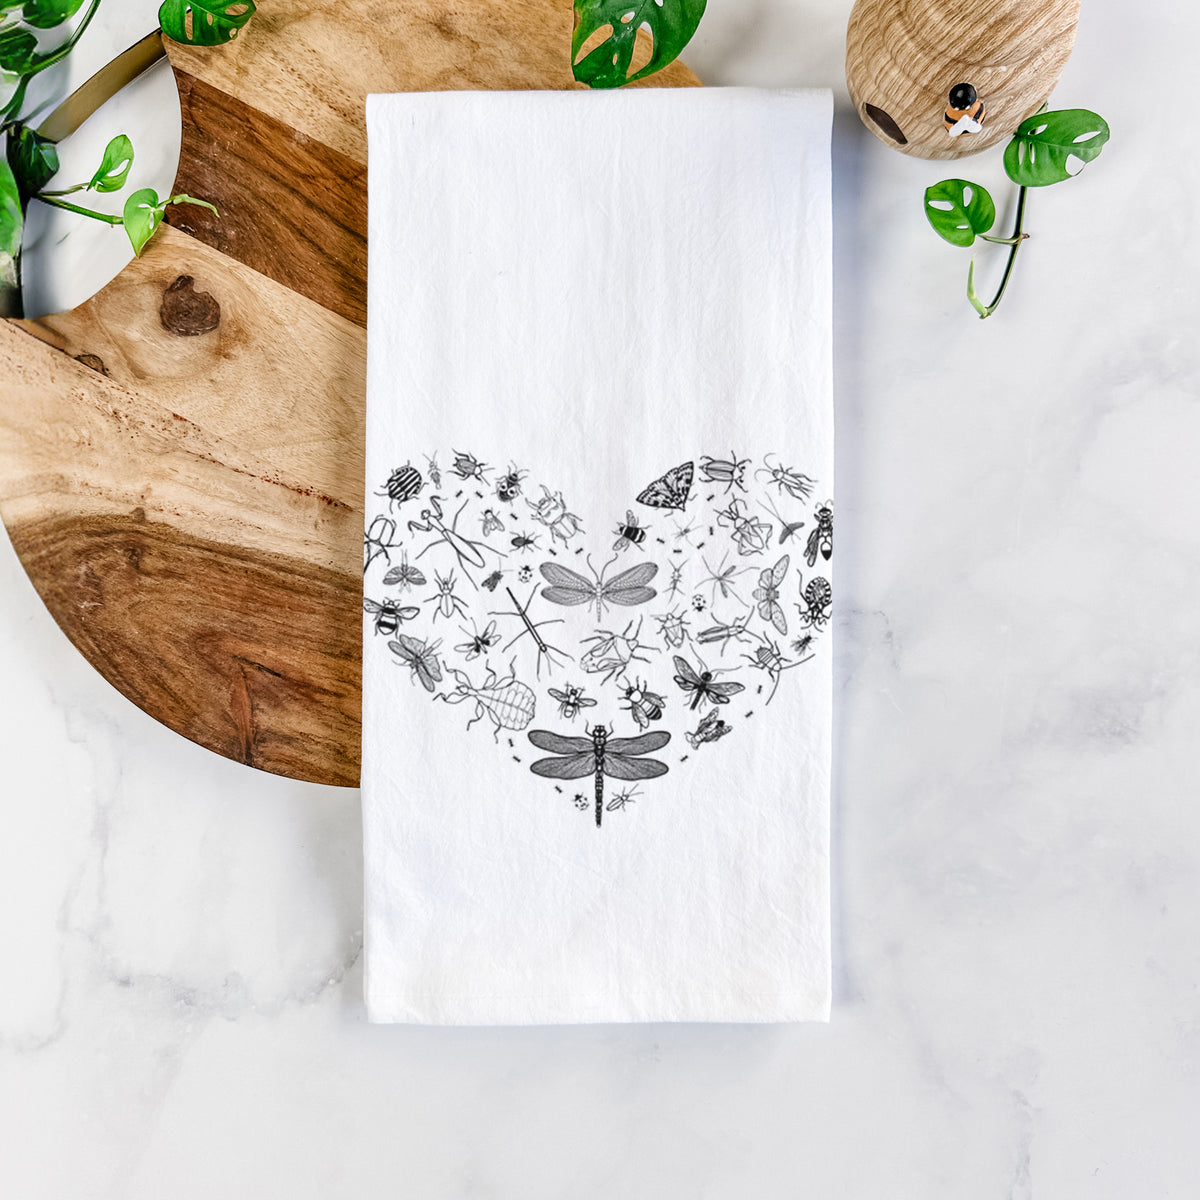 Heart Full of Insects Tea Towel